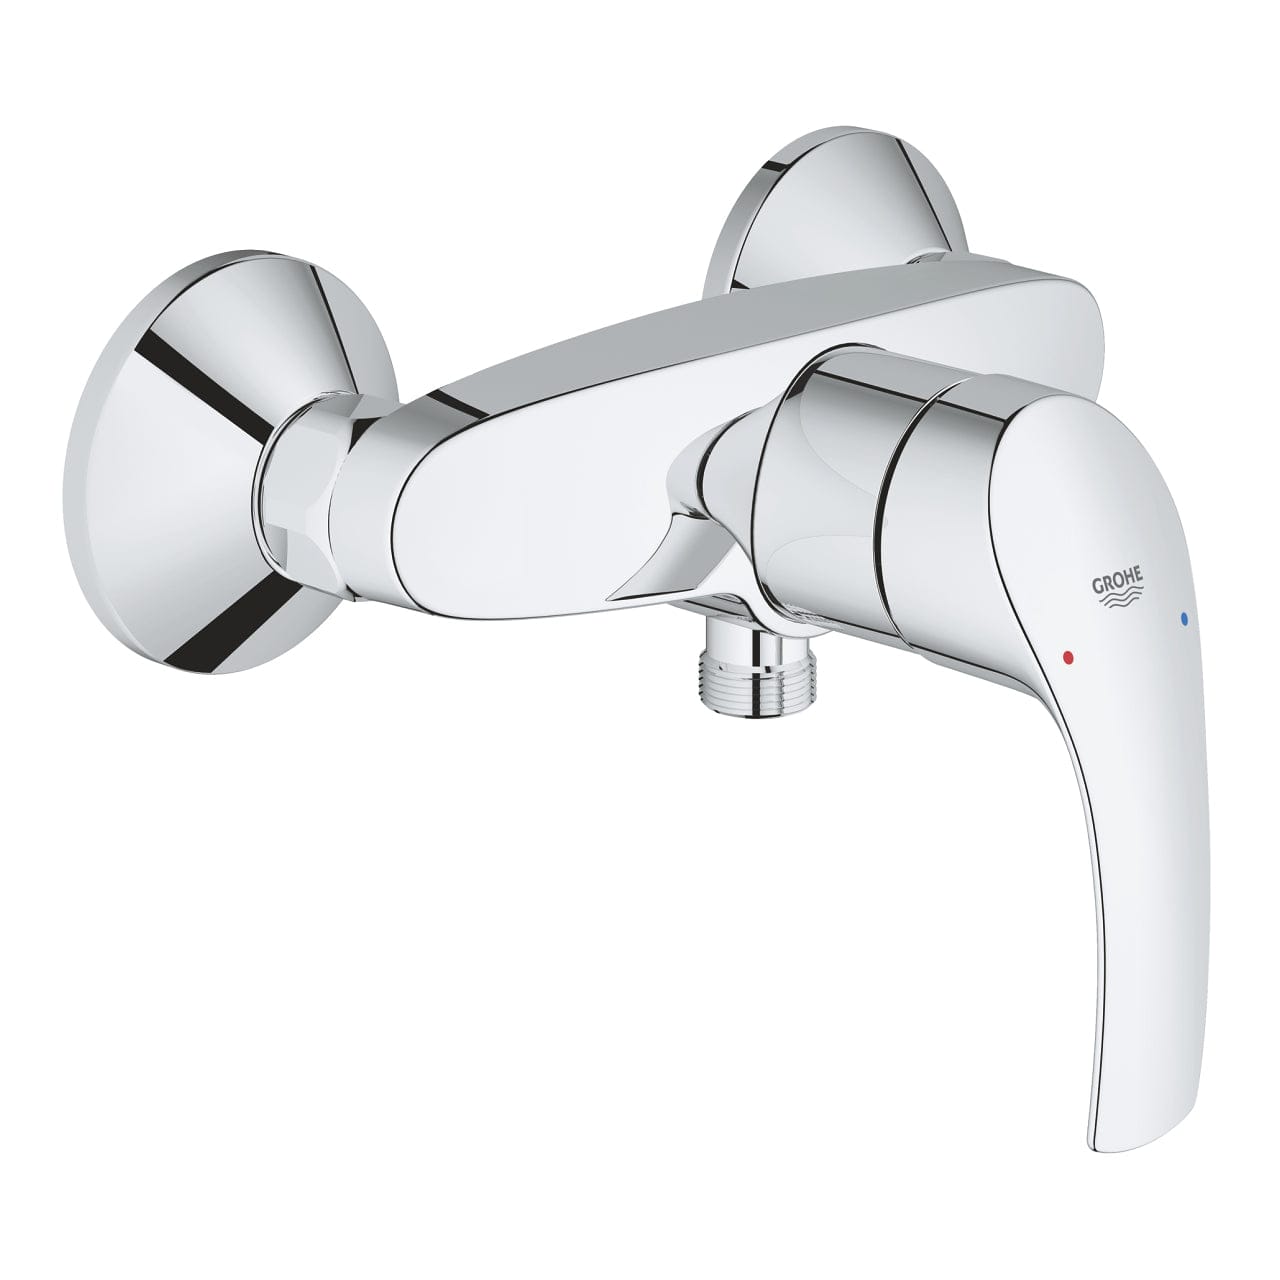 Grohe Eurosmart Single-lever shower mixer 1/2″, Chrome | Supply Master | Accra, Ghana Bathroom Faucet Buy Tools hardware Building materials